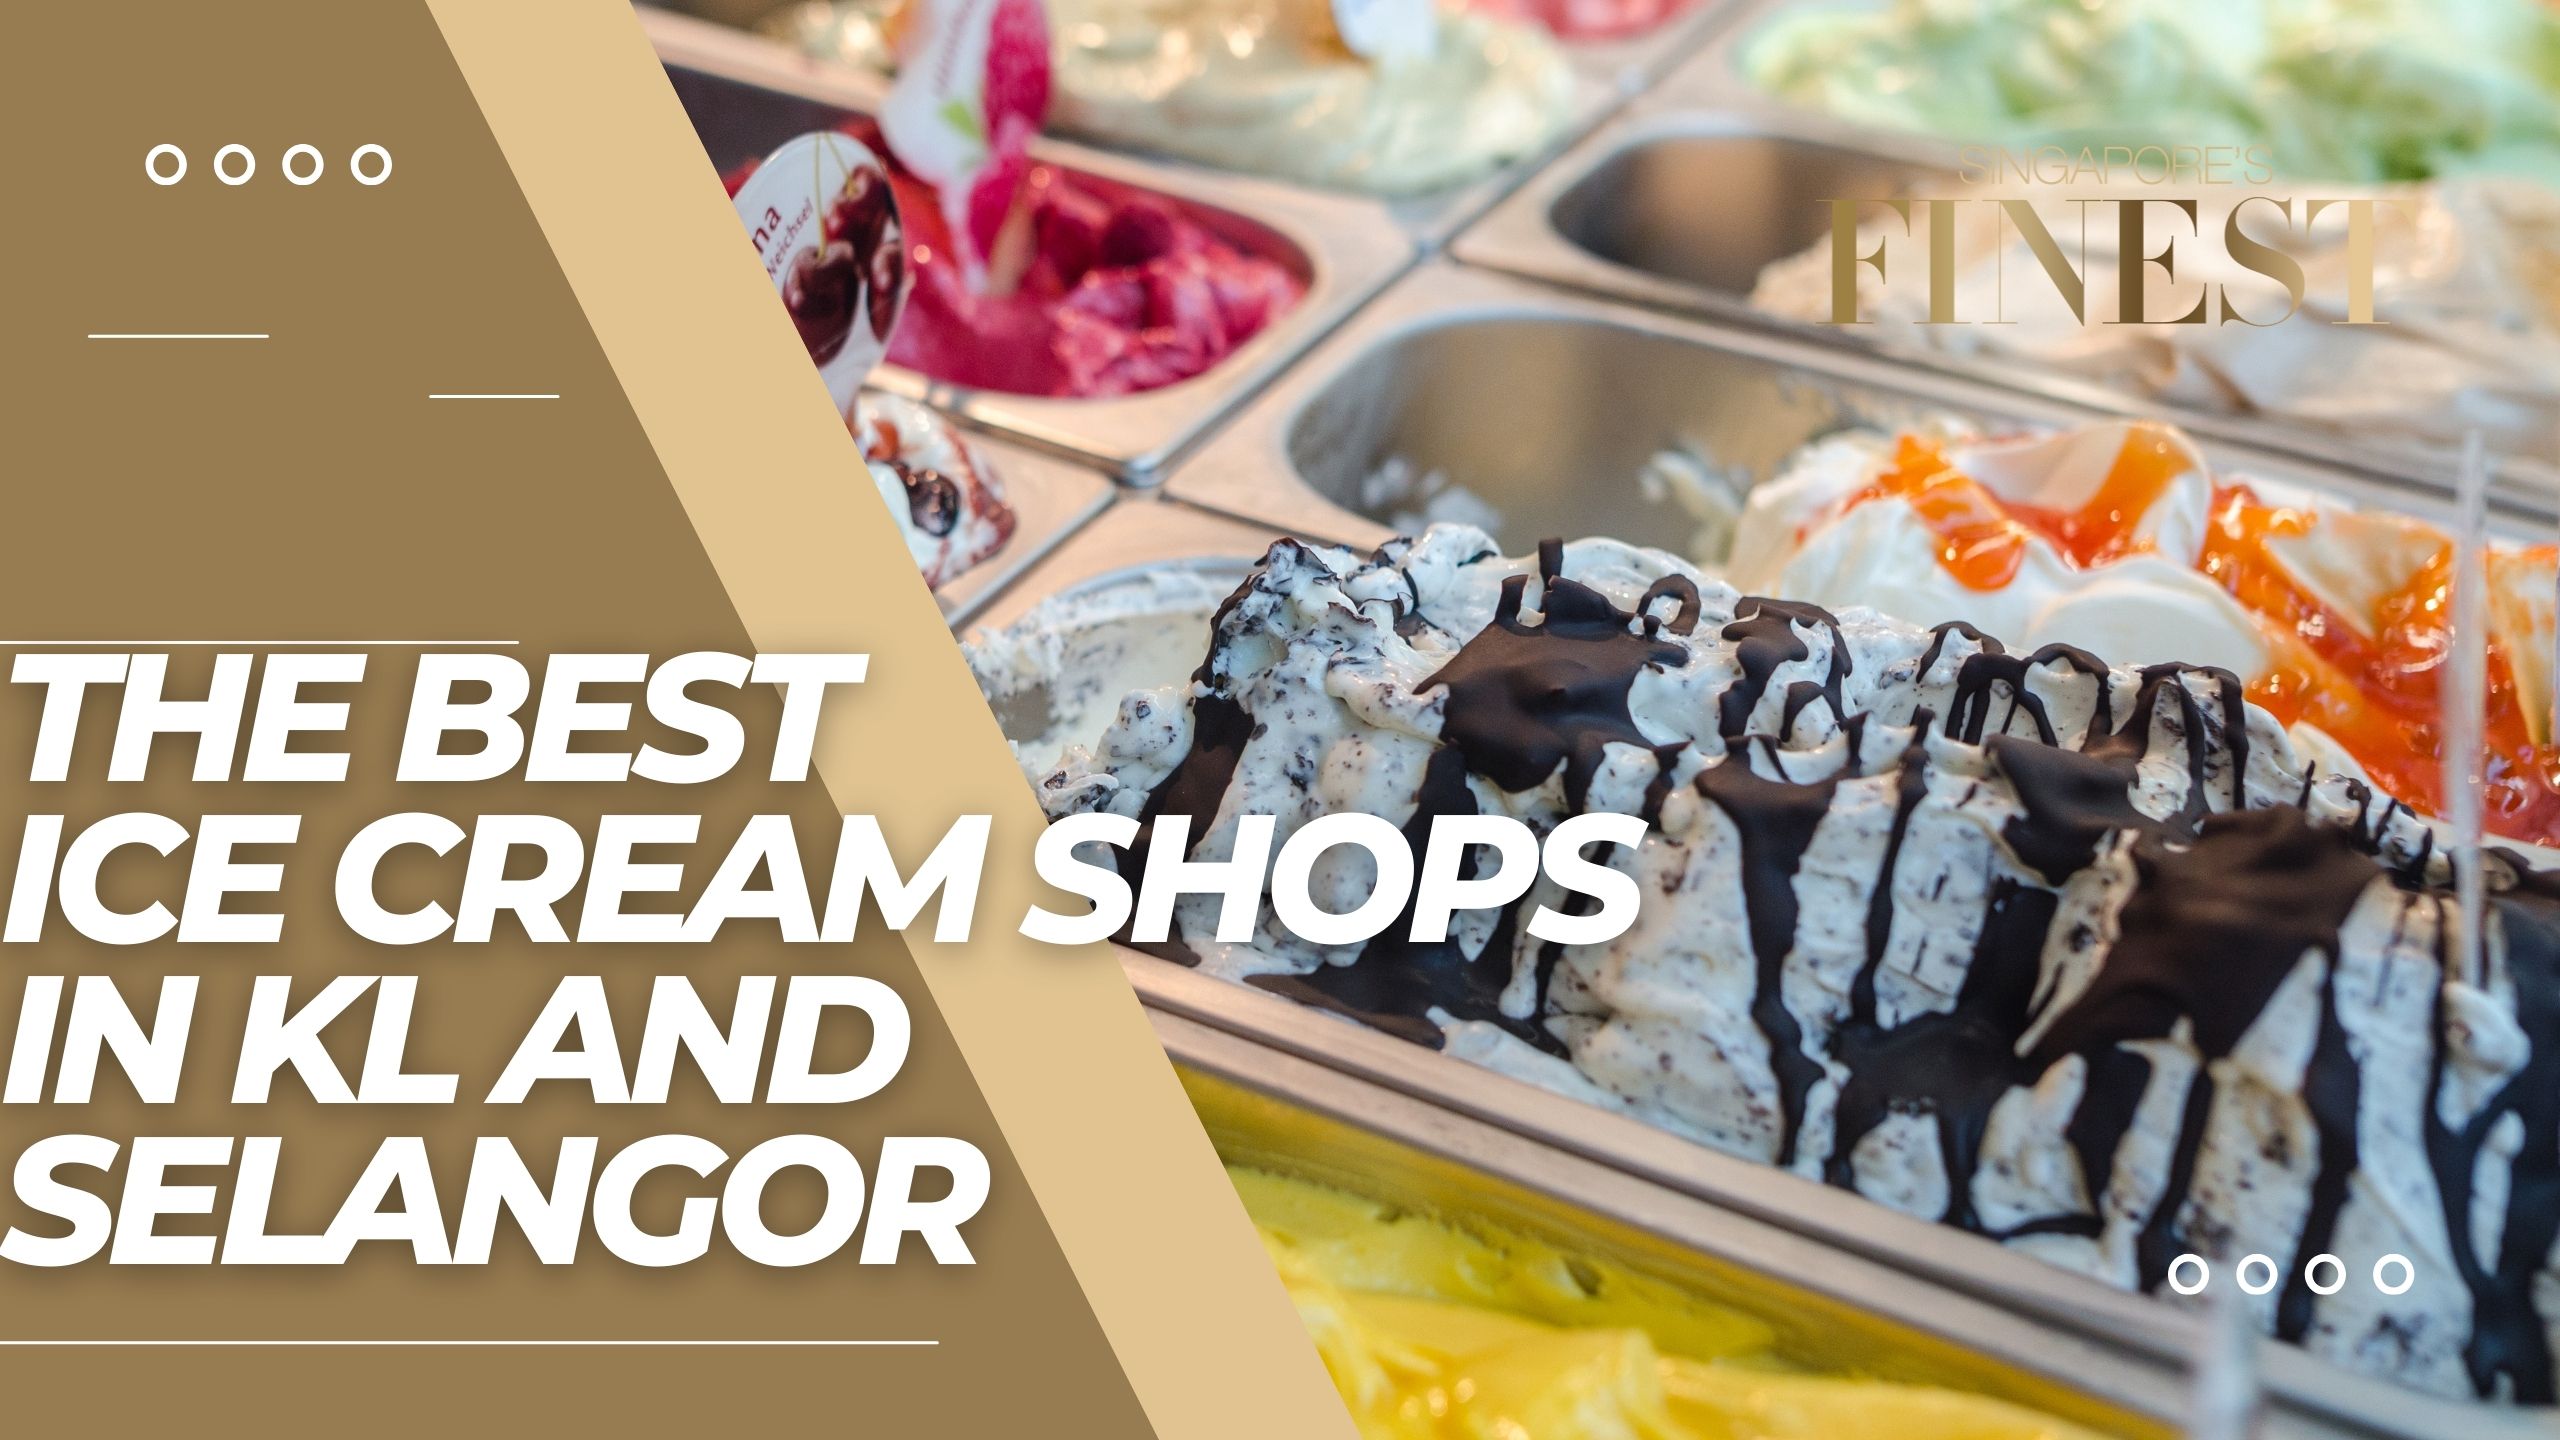 The Finest Ice Cream Shops in KL and Selangor